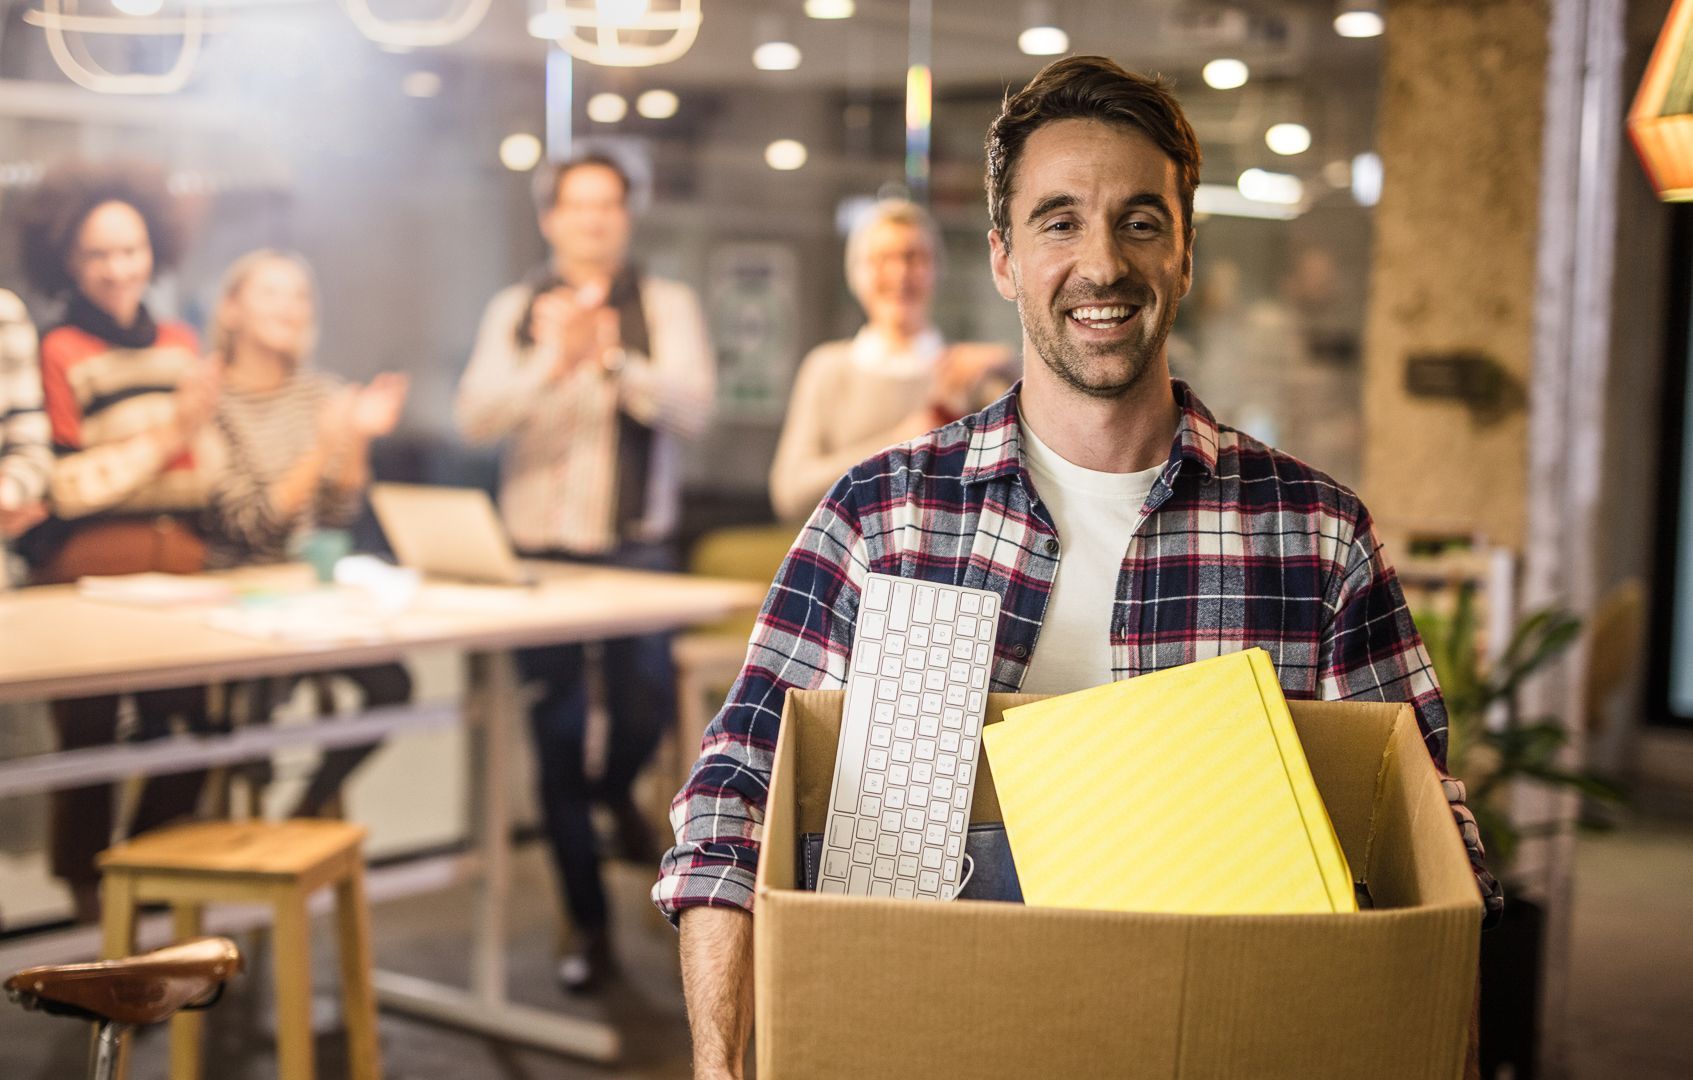 Man carrying a box of personal effects after leaving a job. He is smiling and surrounded by smiling